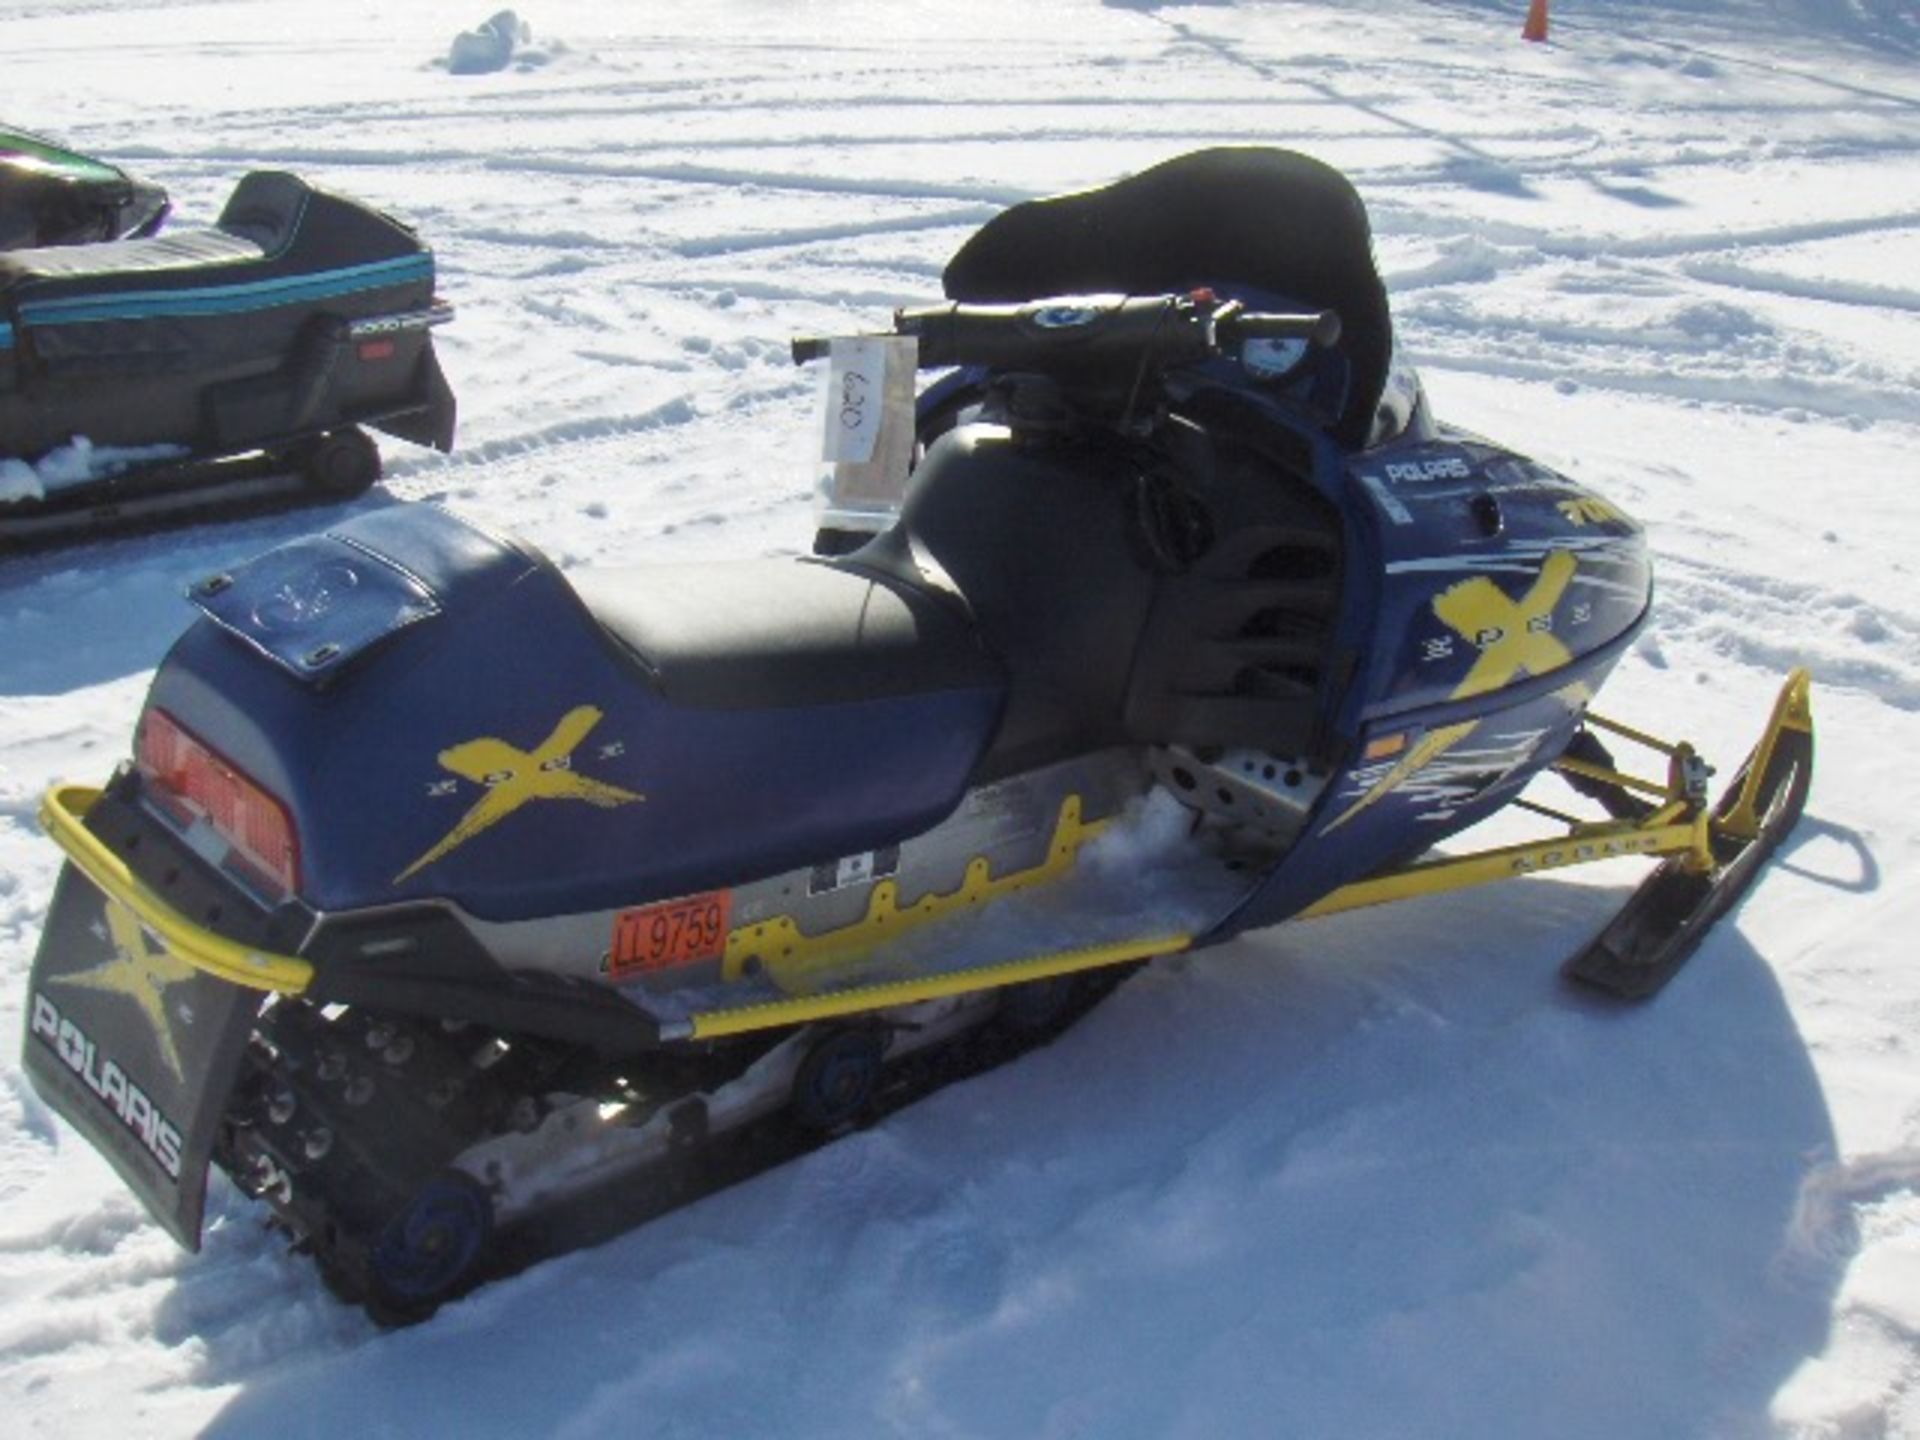 2002 POLARIS 700 EDGE  4XANP7CS926246745 snowmobile, owner started at time of auction check in, sold - Image 3 of 4